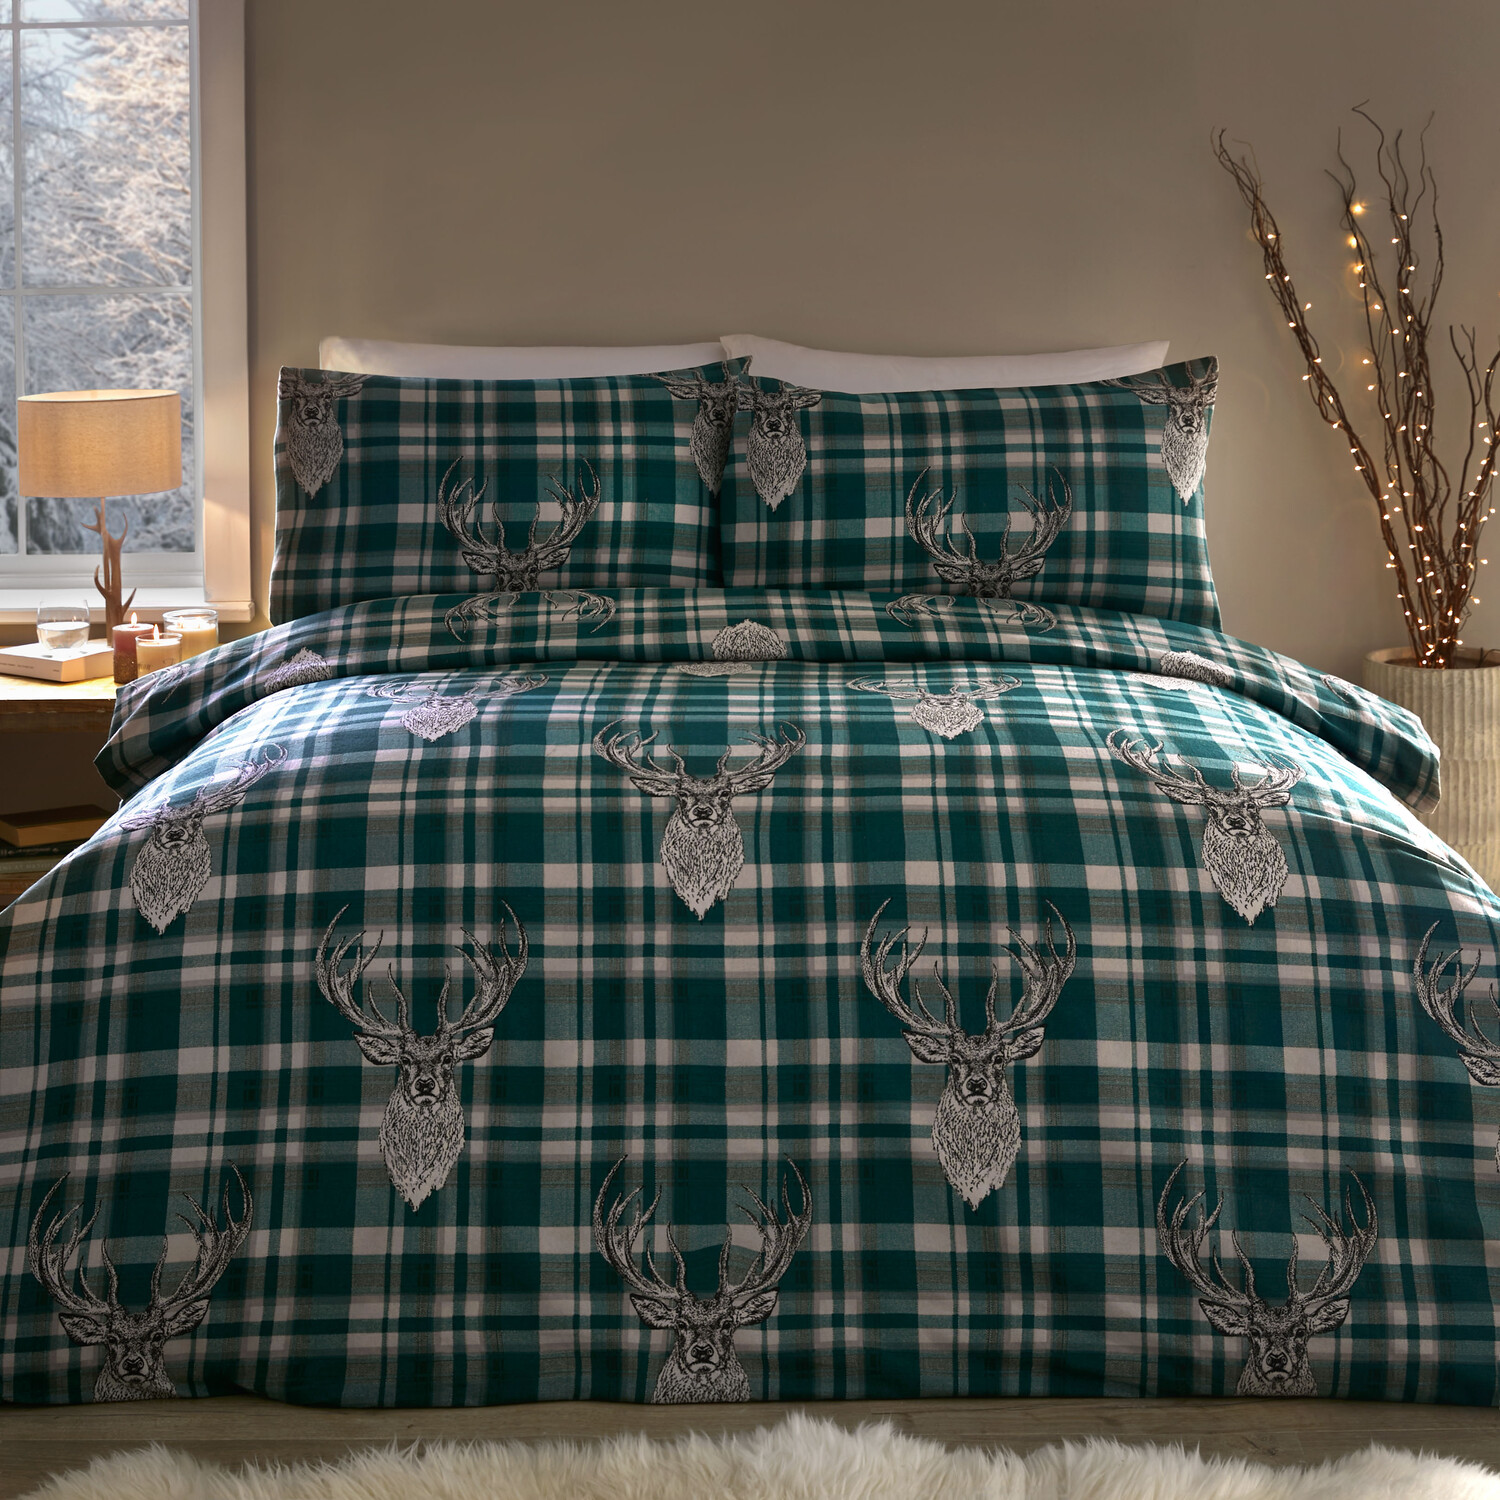 Divante King Green Moorland Stag Check Duvet Cover and Pillowcase Set Image 1